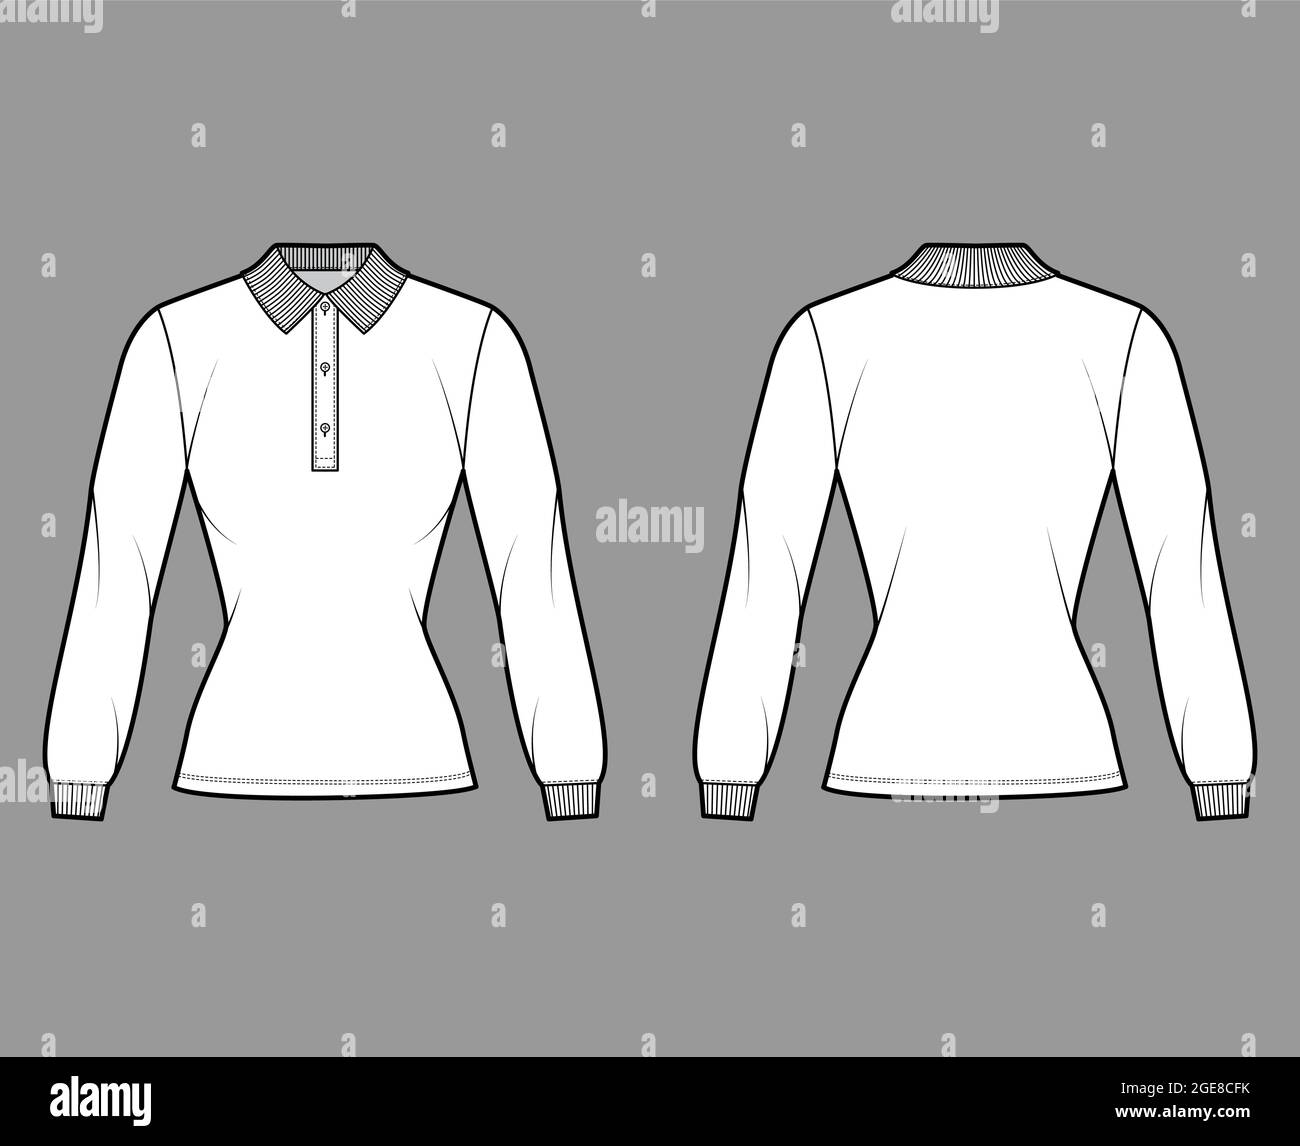 Shirt polo fitted body technical fashion illustration with long sleeves, tunic length, henley button neck, flat knit collar. Apparel top outwear template front, back, white color. Women men CAD mockup Stock Vector